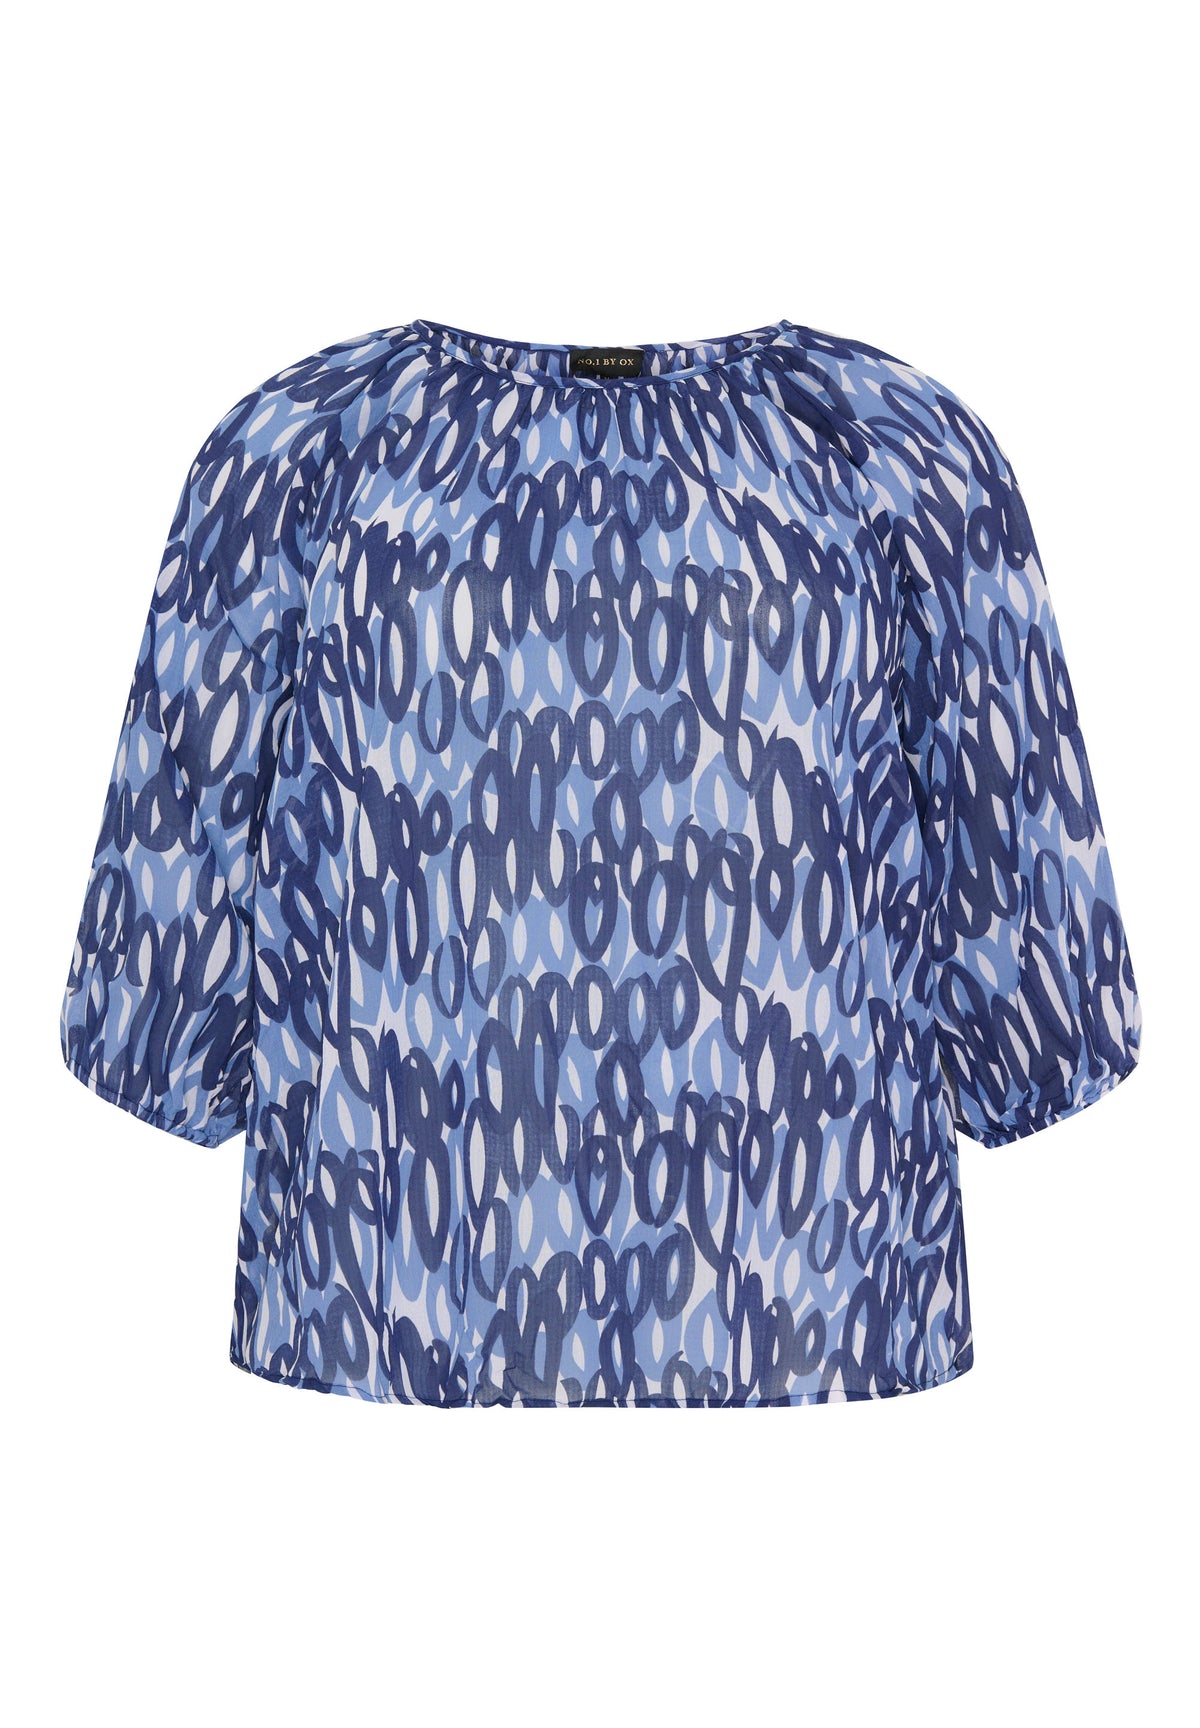 NO. 1 BY OX Bluse med 3/4 ærmer Bluser Blue and Light Blue oval circles